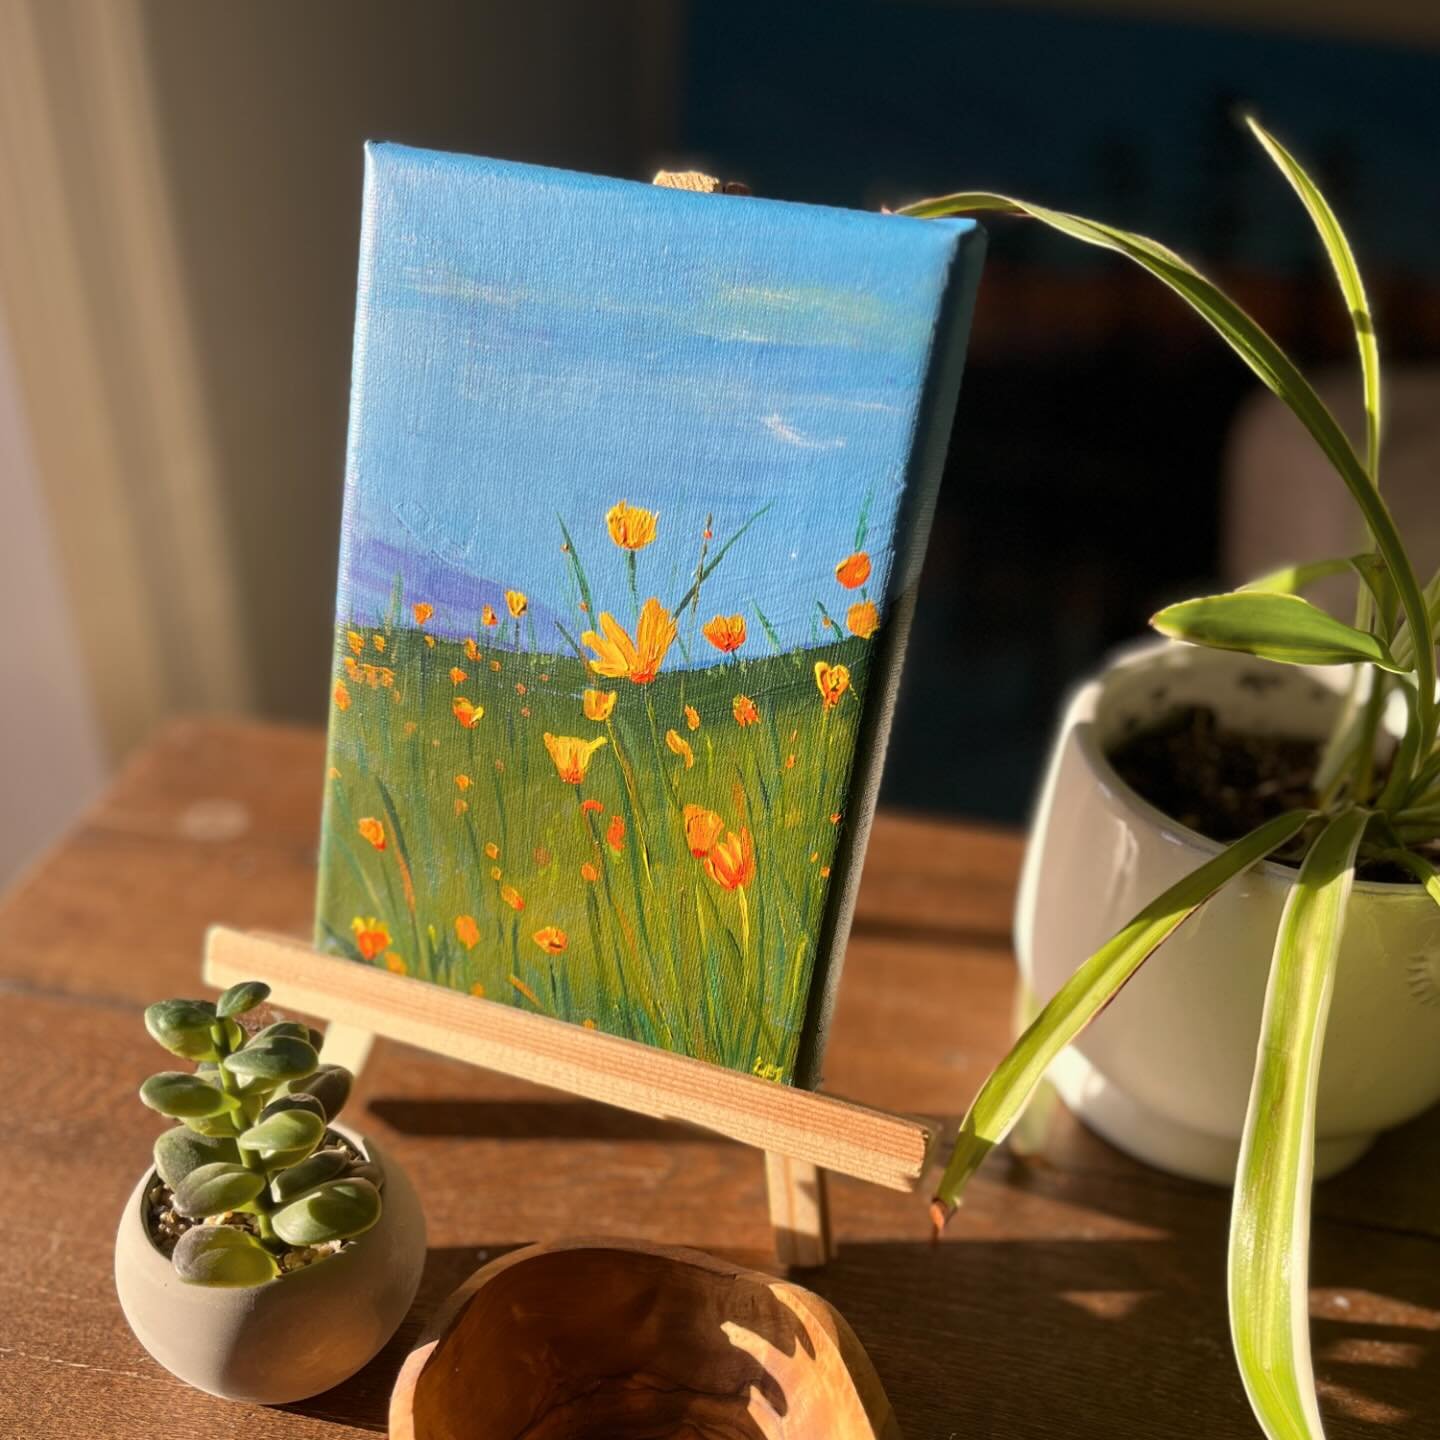 Day 68 of #the100dayproject and I did this little mini acrylic painting. It will be available Saturday at #makersnorth booth 55 🥰.

#tinyart #creativityeveryday #creativityexplode #createdaily #happycreativelife #acreativeoutlet #acrylicpainting #fl